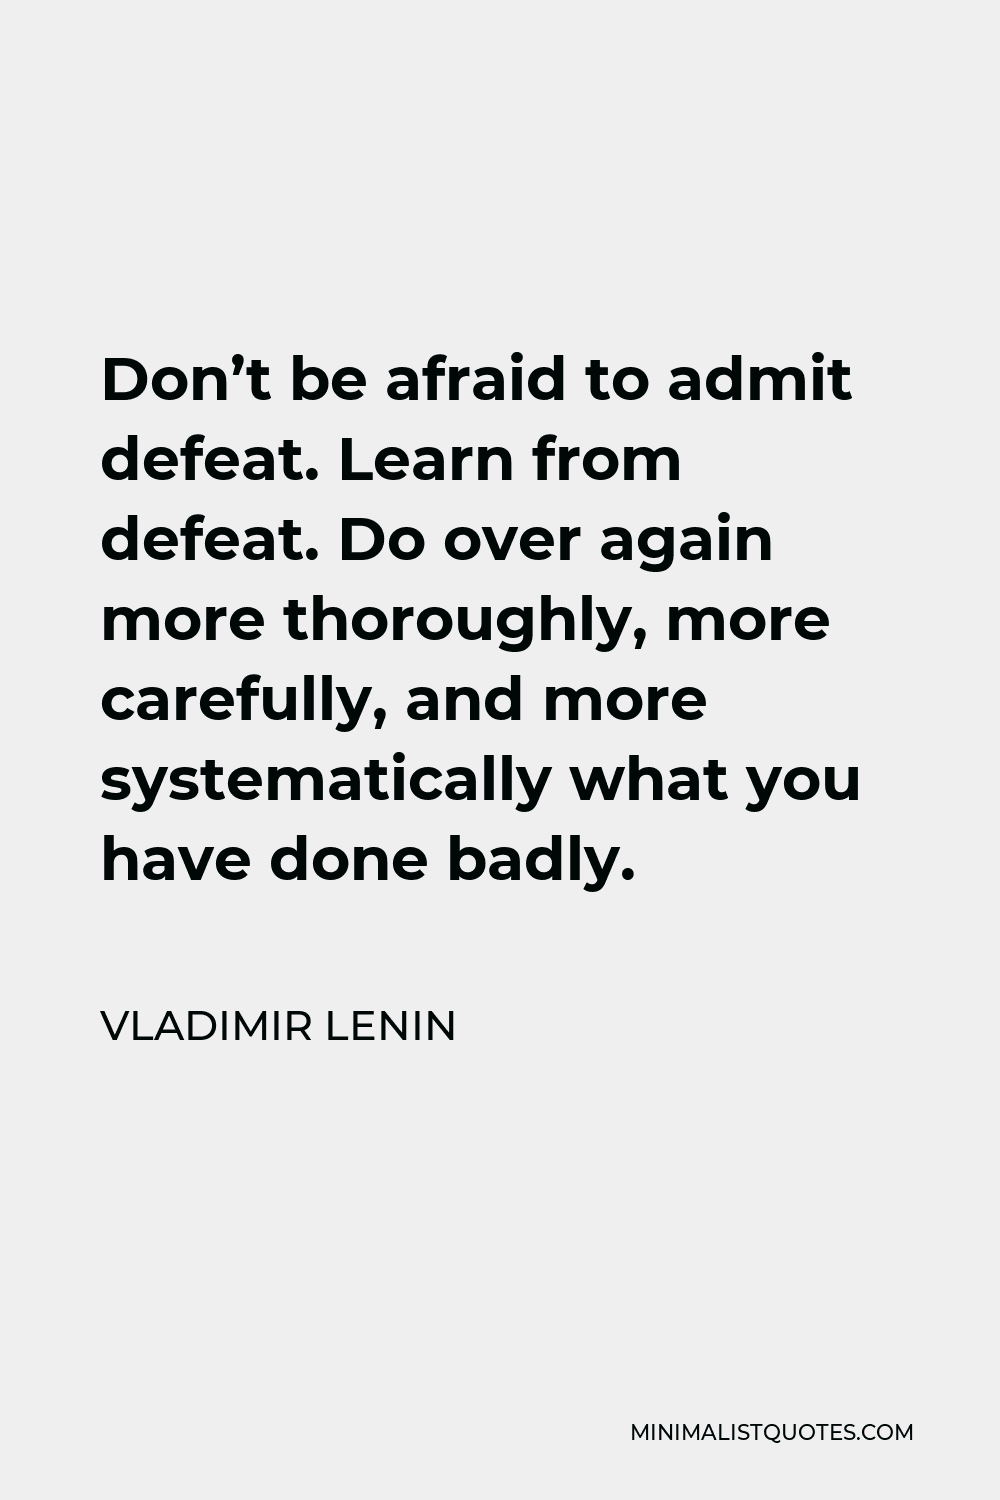 Vladimir Lenin Quote - Don’t be afraid to admit defeat. Learn from defeat. Do over again more thoroughly, more carefully, and more systematically what you have done badly.